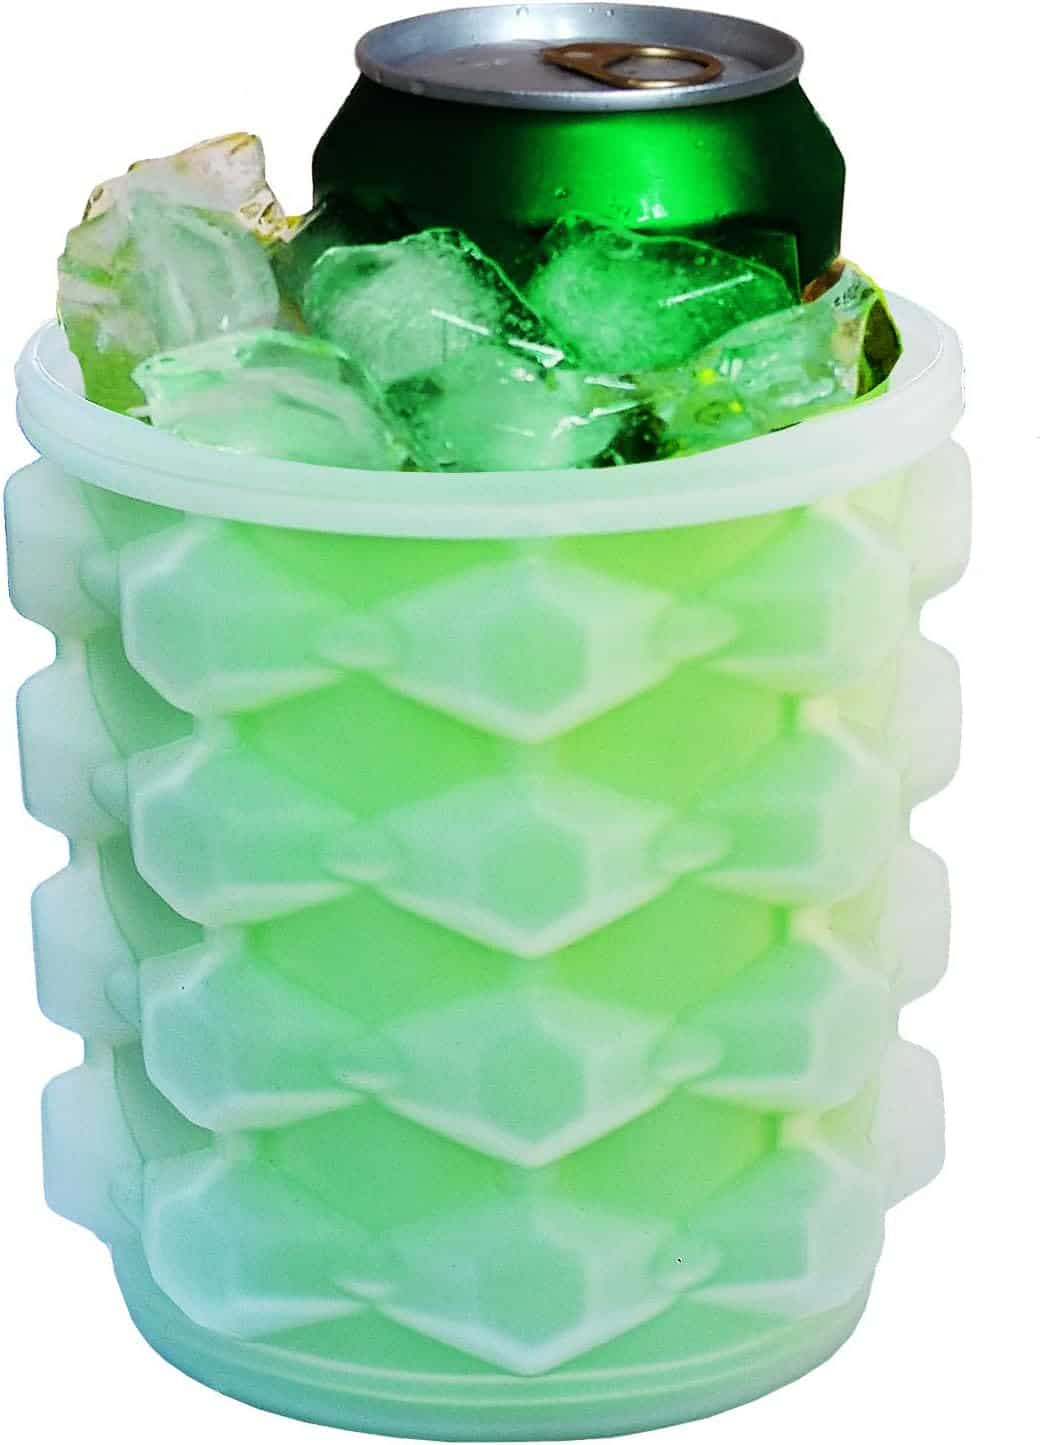 New Ice Cube Maker Silicone Bucket Mold Cooler With Lid Indoors Outdoors Use Makes Small Nugget Ice Chips for Soft Drinks Beverage Wine Beer Whiskey Cocktail Safe Healthy BPA Free Ice Tray Cylinder 3